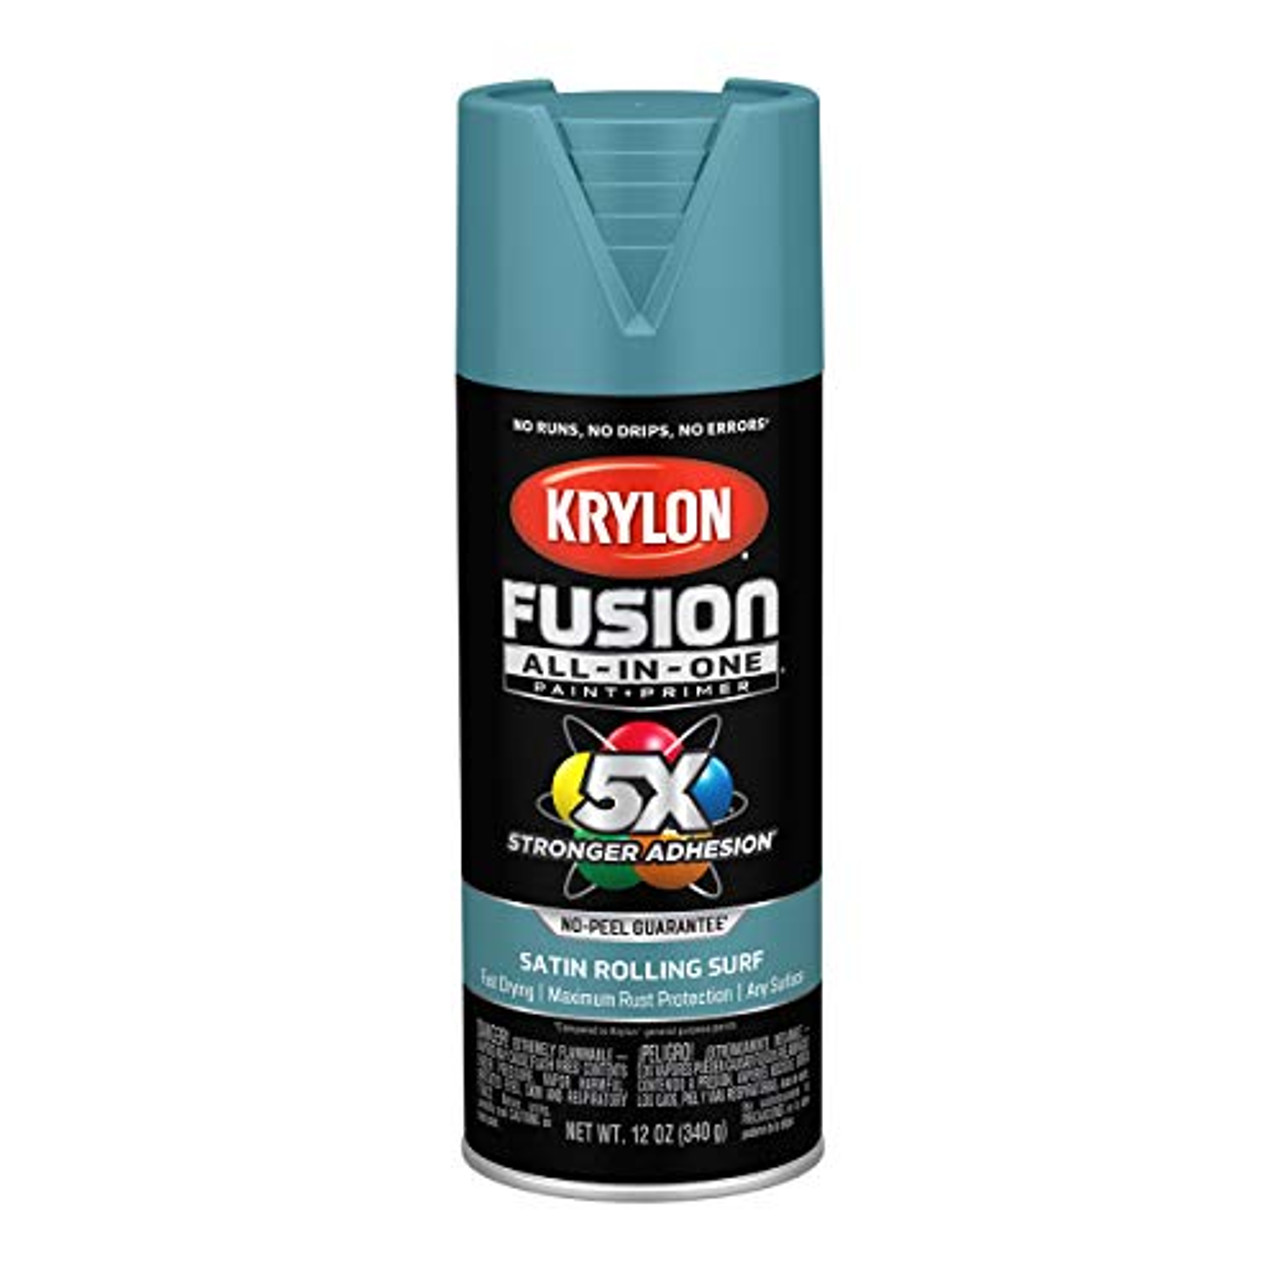 Krylon Fusion K02747007 All-In-1 Spray Paint for In/Outdoor Satin Rolling  Teal